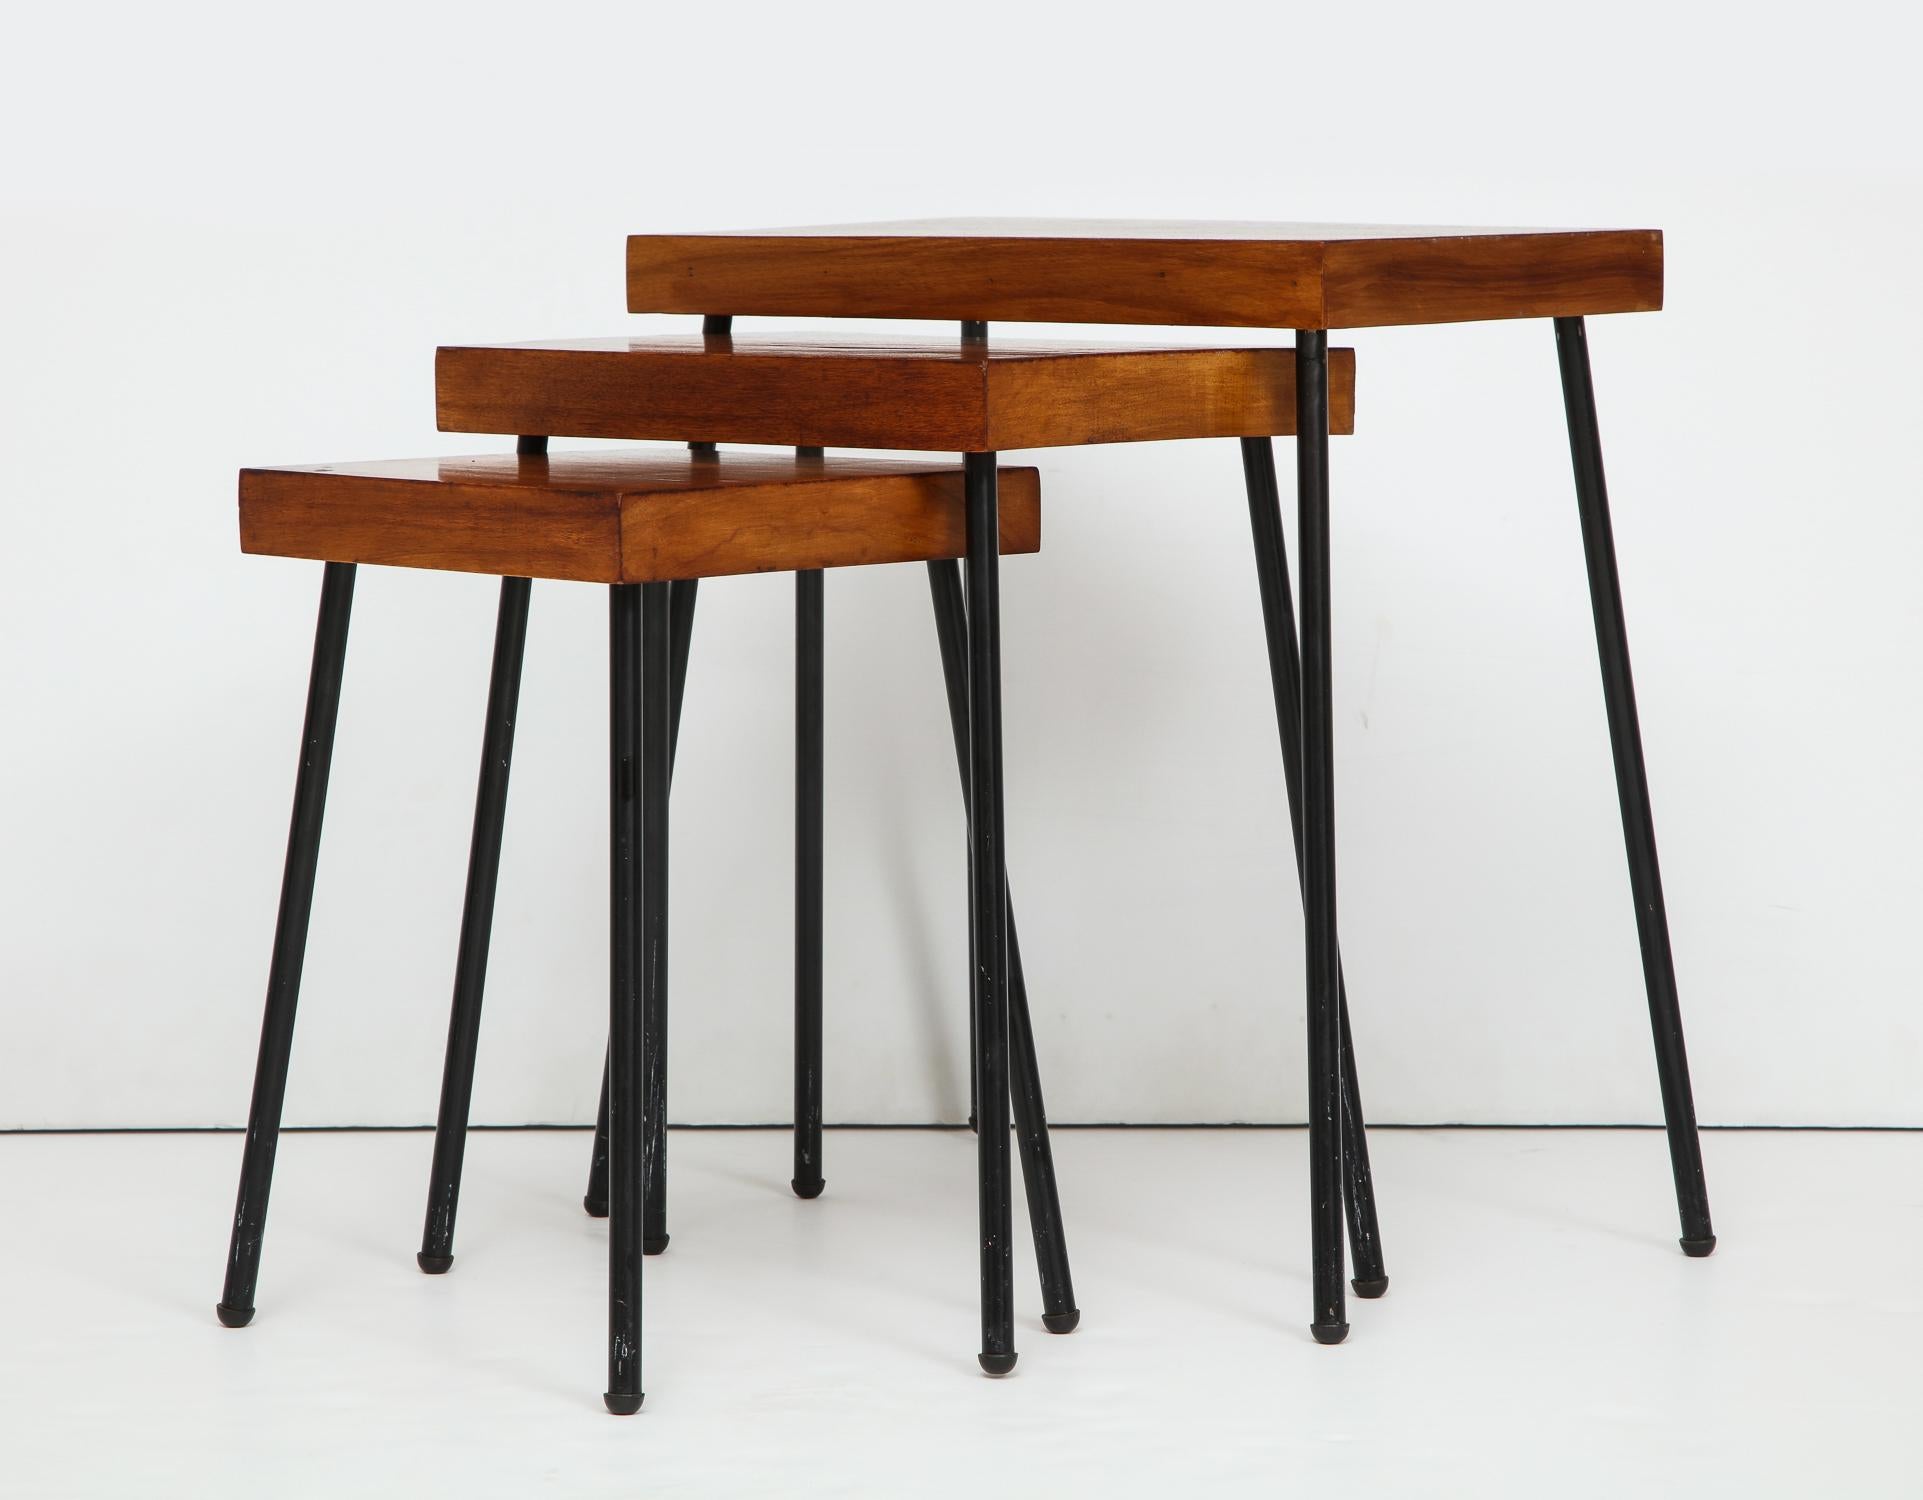 Nest of three tables with birch tops and blackened tubular steel legs. Designed by David Wurster and produced for Richards-Morgentau (Raymor) circa 1952. Wurster's lighting was a regular Good Design selection at MoMA in the early 1950's, and this